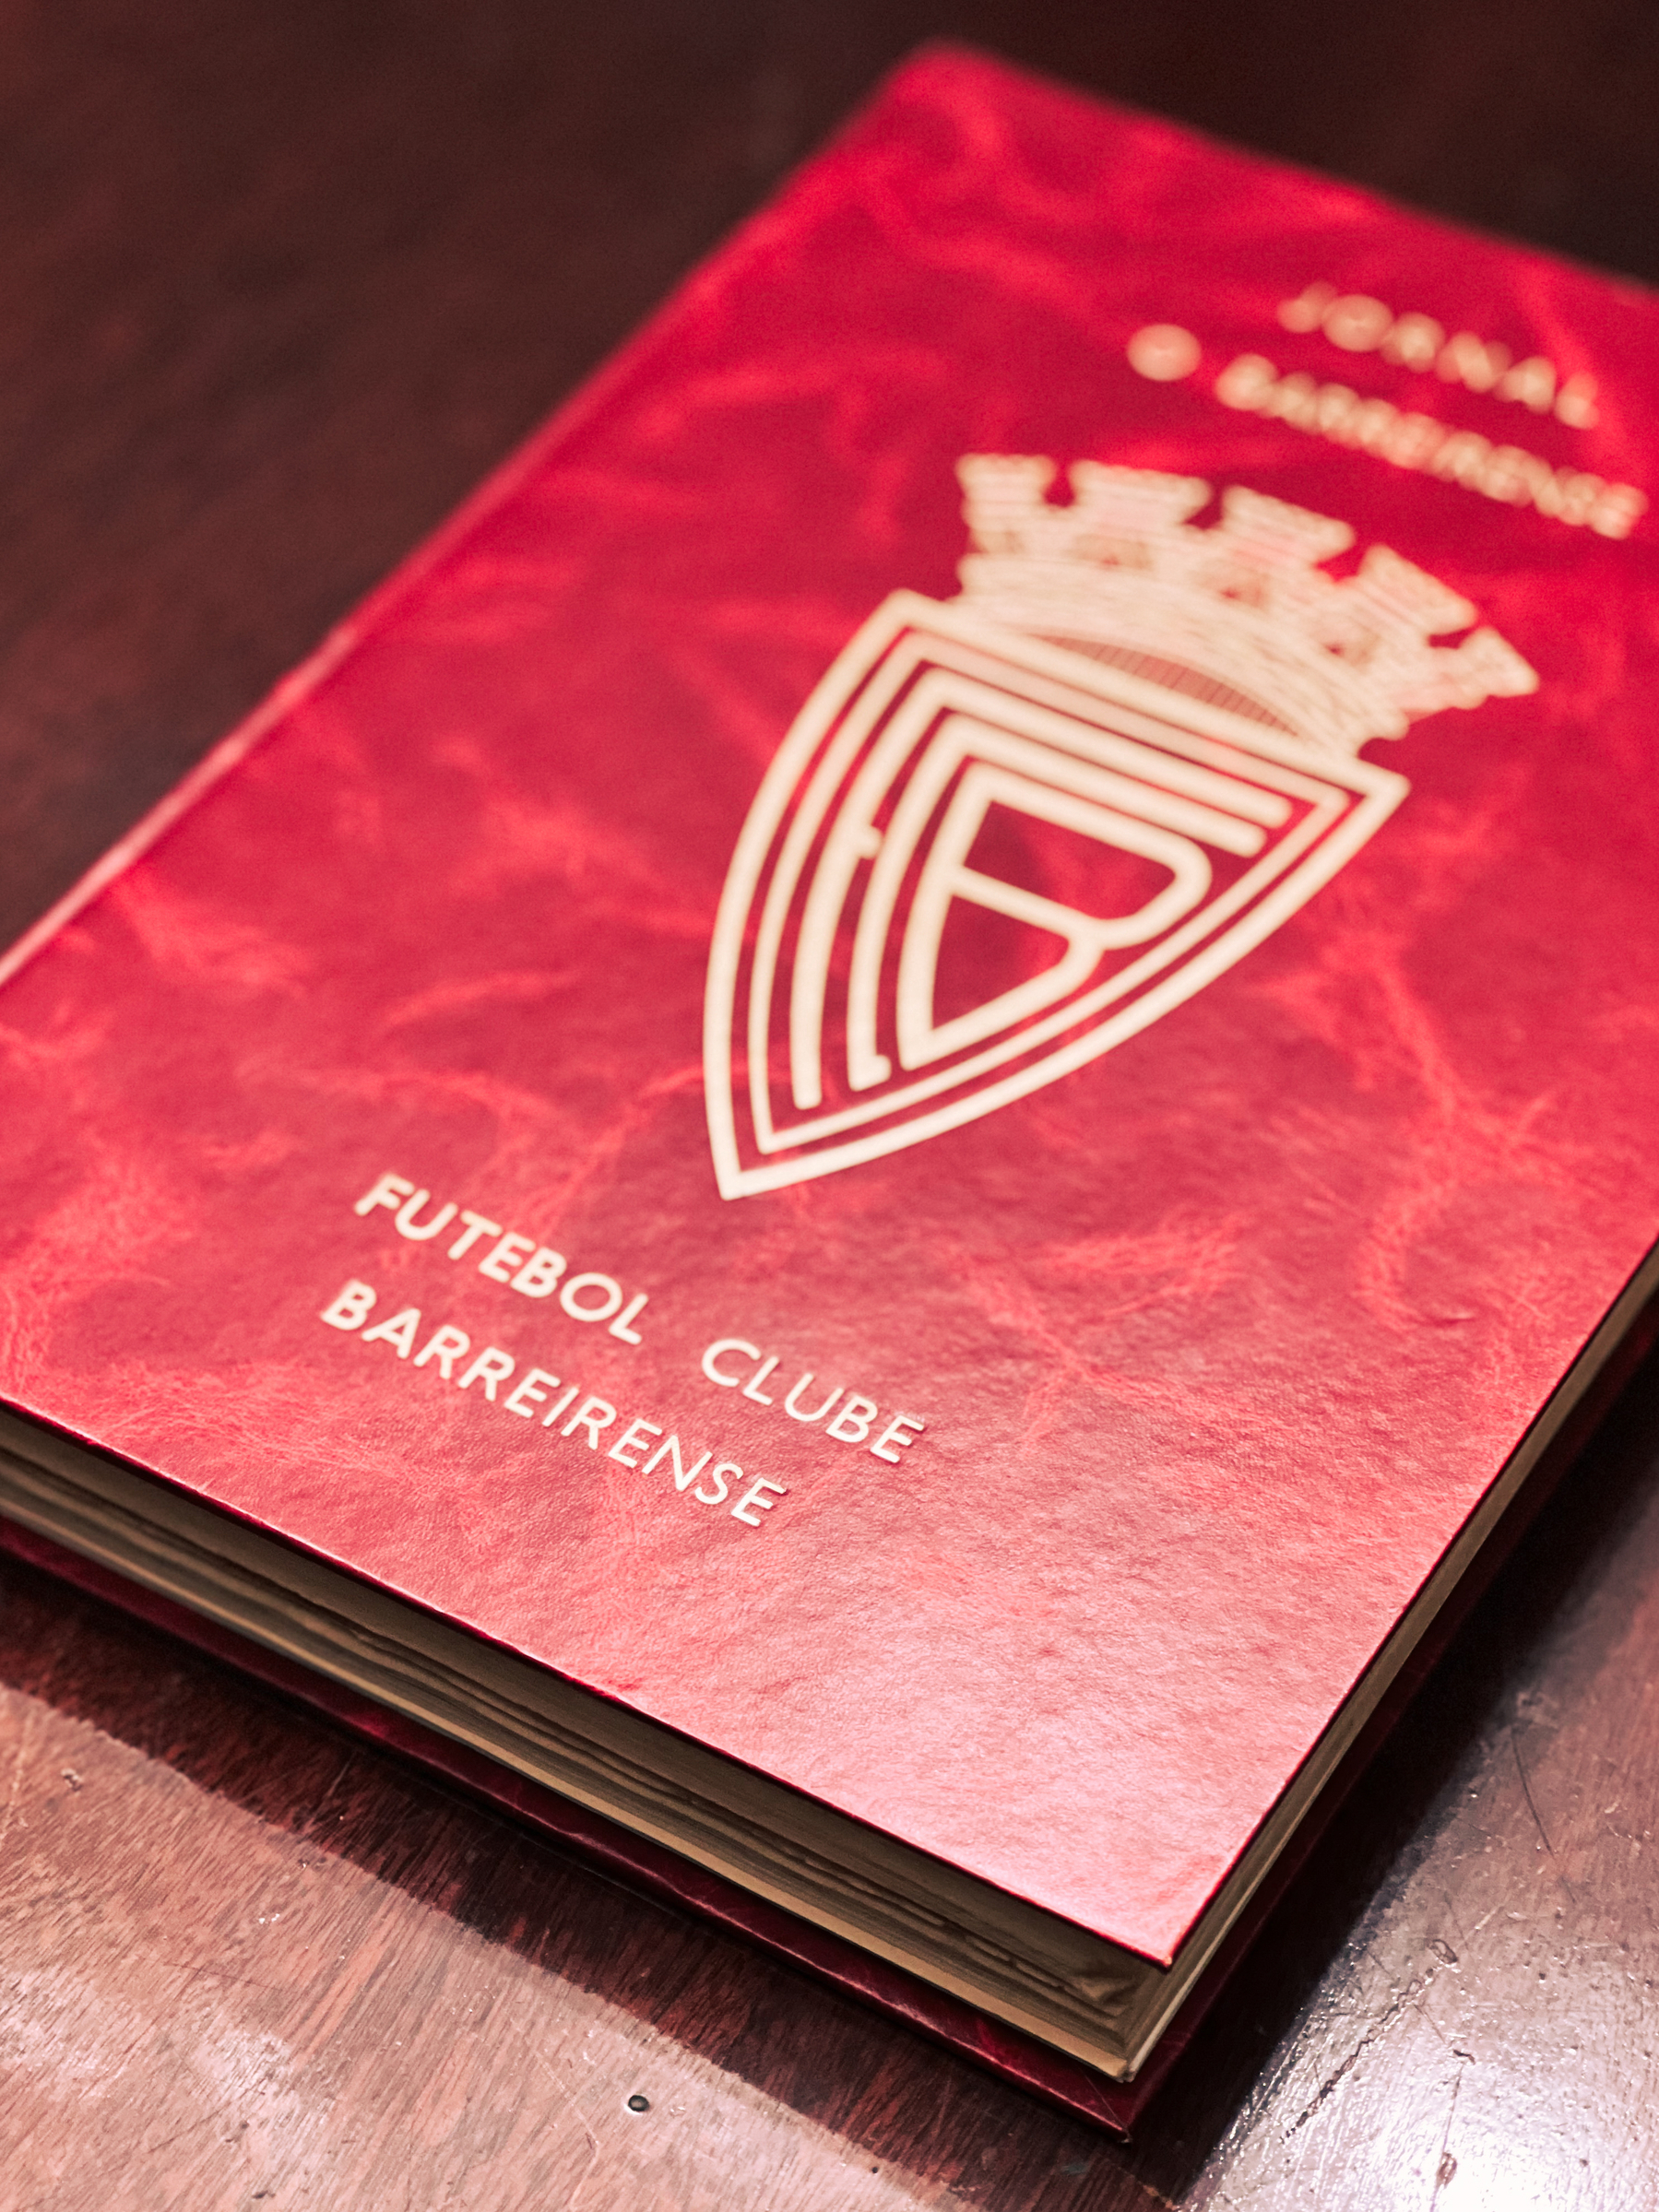 A red book with the emblem and the words &ldquo;Futebol Clube Barreirense&rdquo; on the cover, placed on a wooden surface.